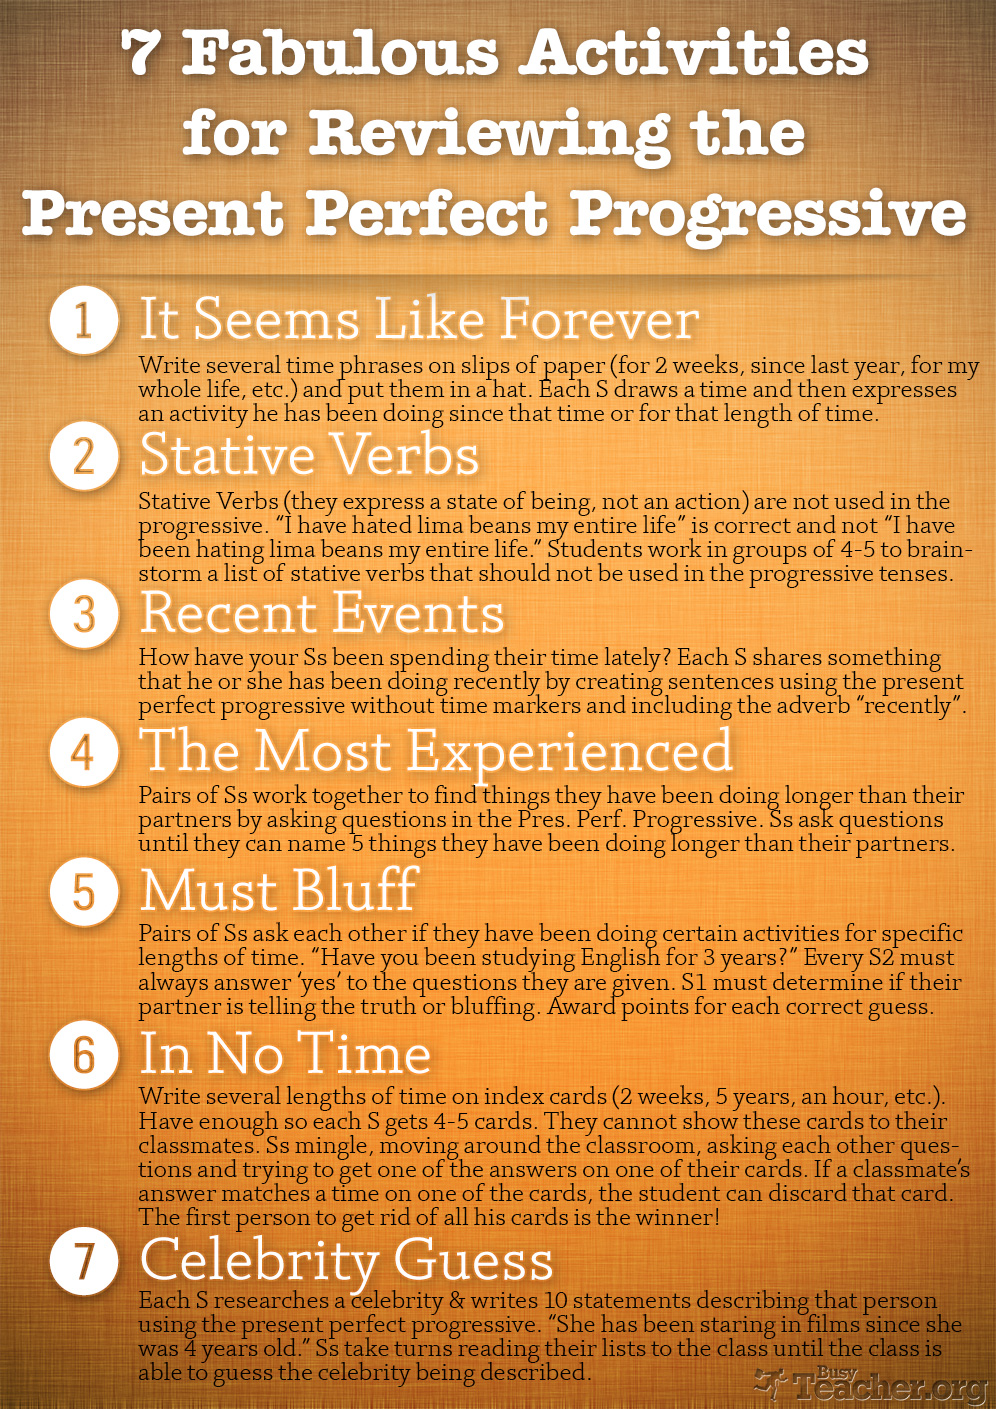 7 Fabulous Activities to Review the Present Perfect Progressive: Poster